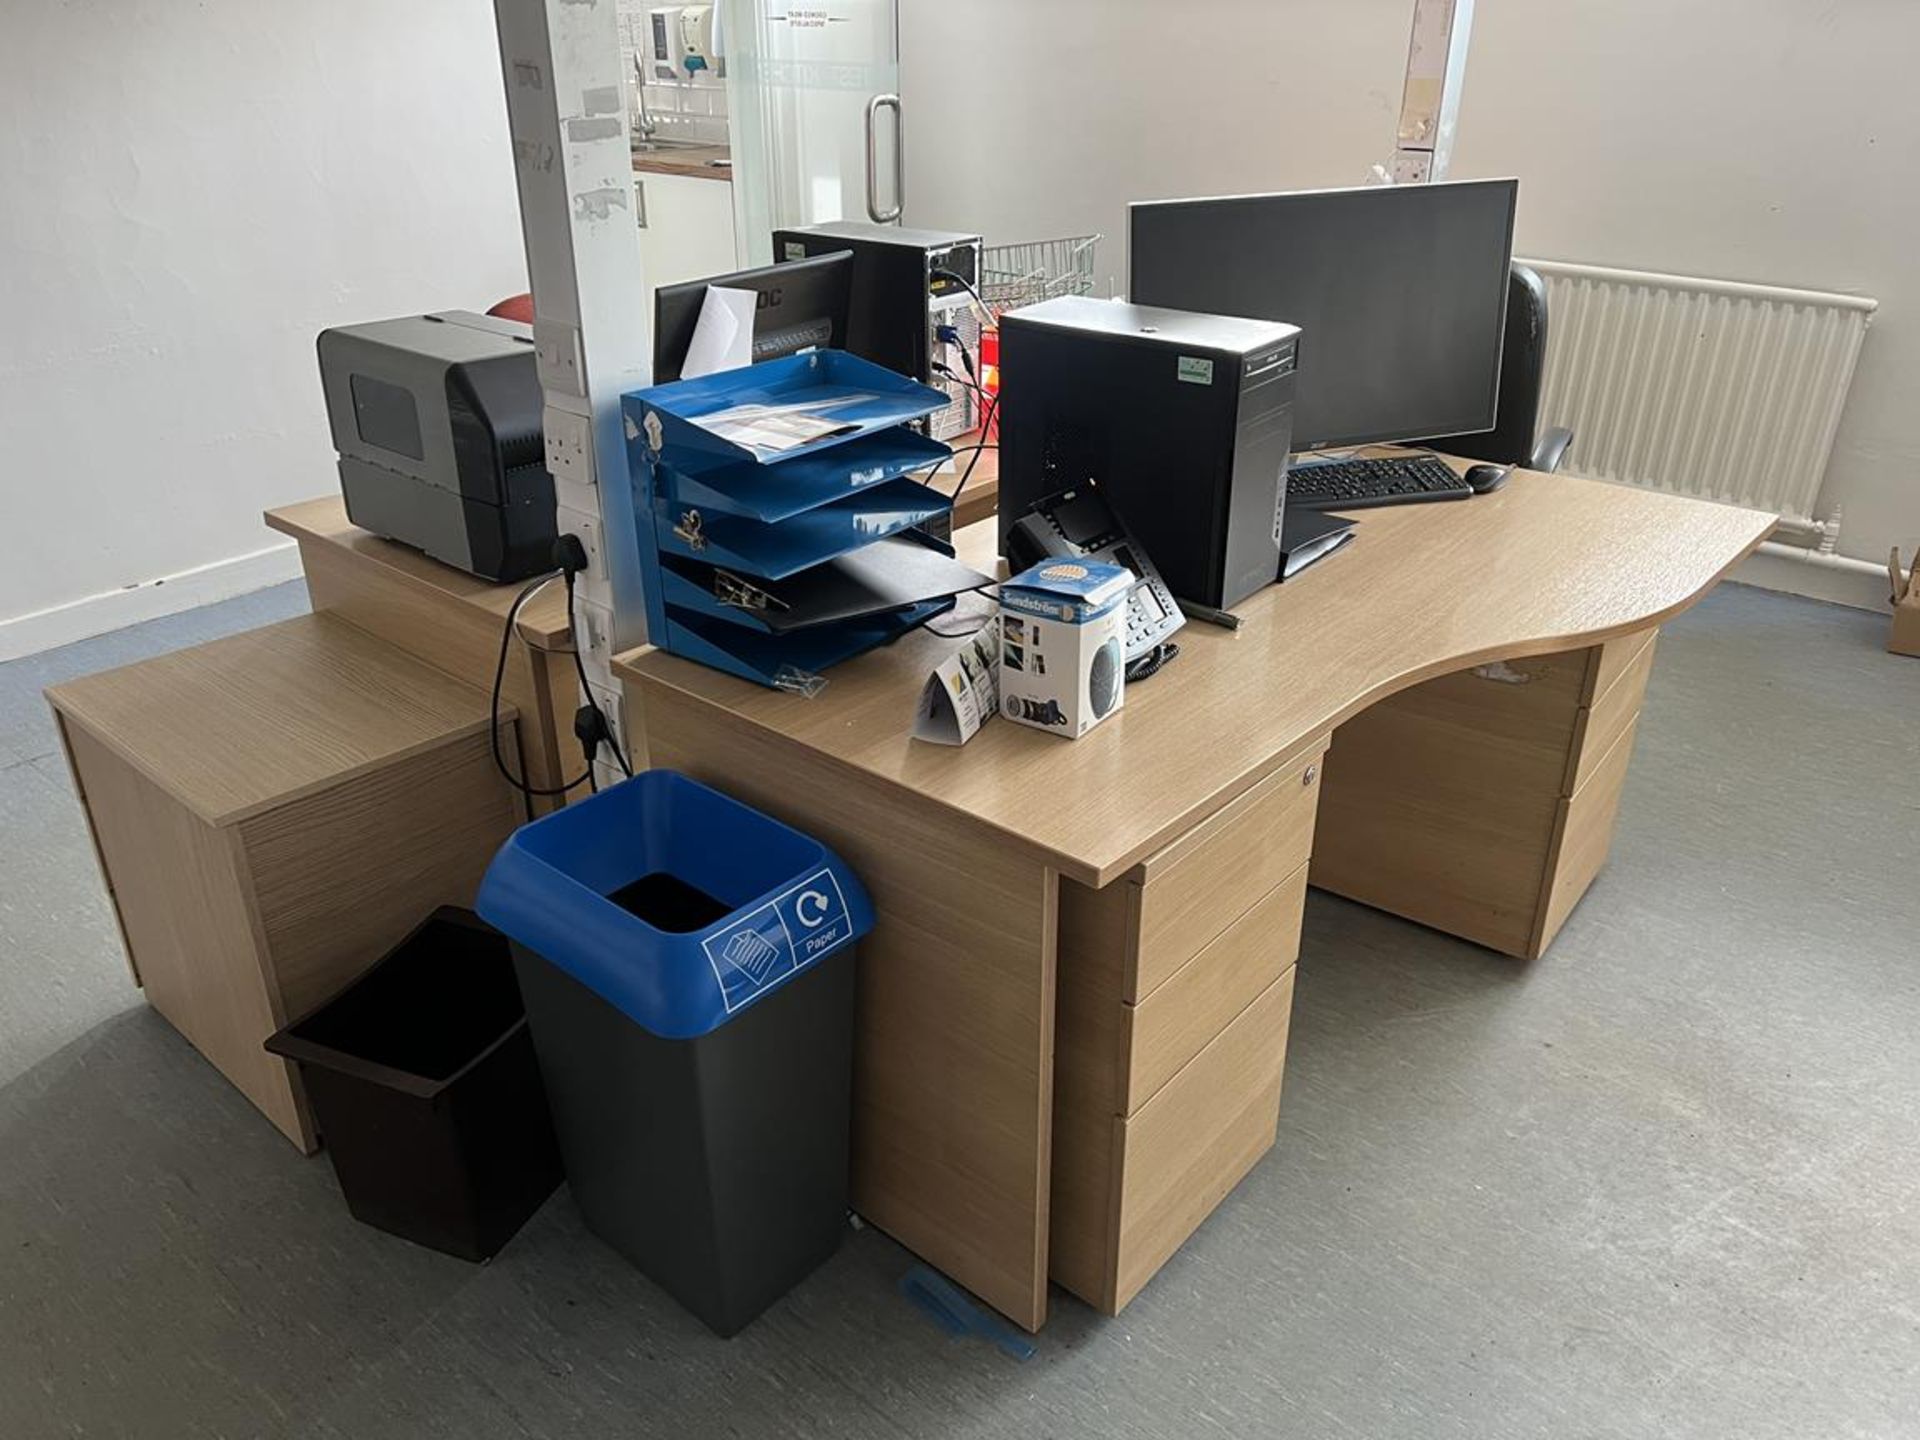 Furniture contents of the second test kitchen office to include laminate office desks and cupboards,